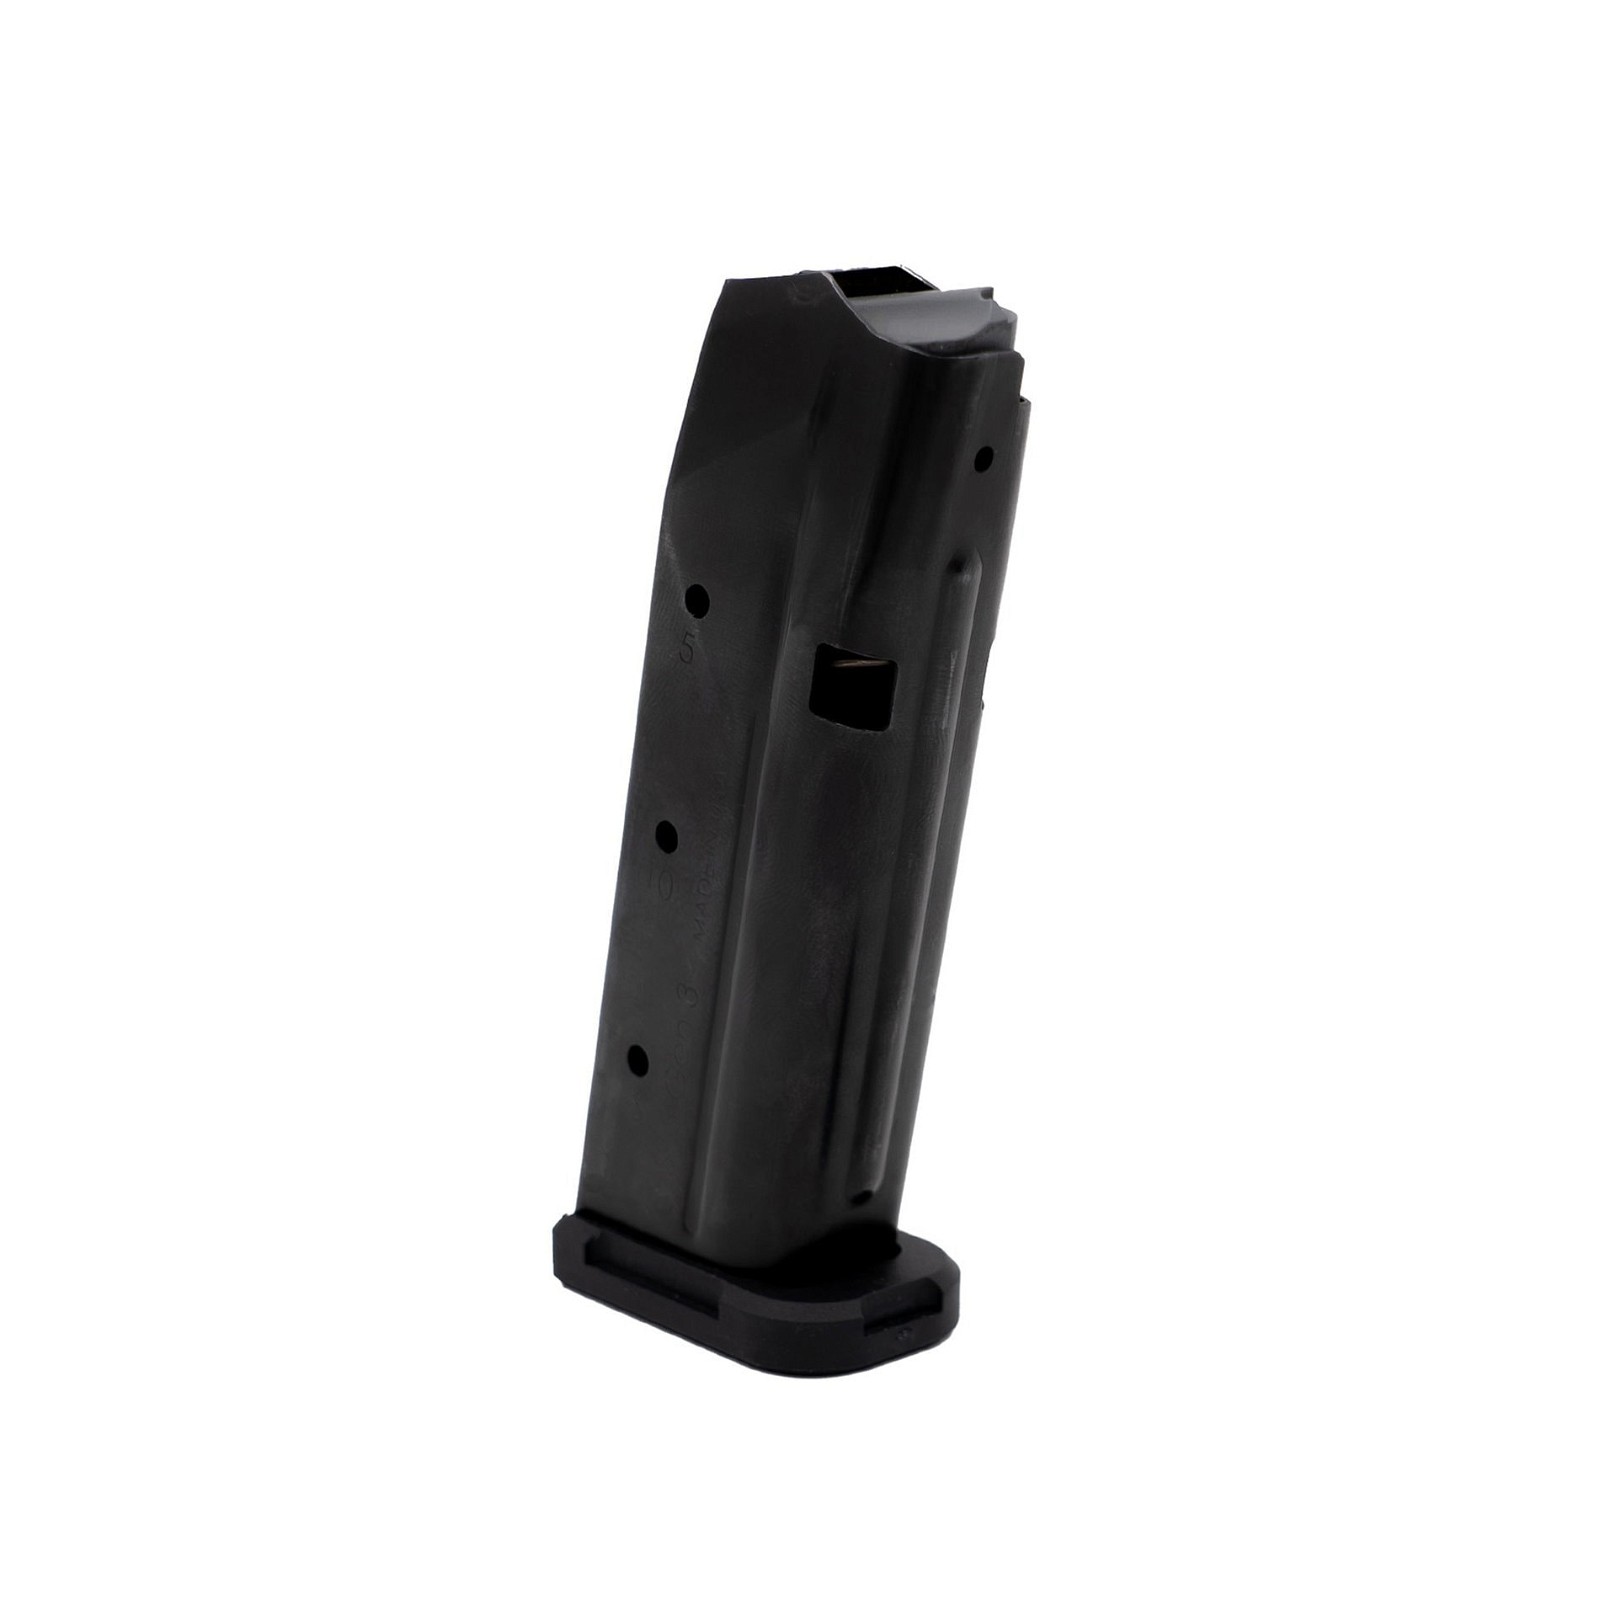 Shield Arms S15 Magazine for Glock 43x and 48 – 15 Round Magazine